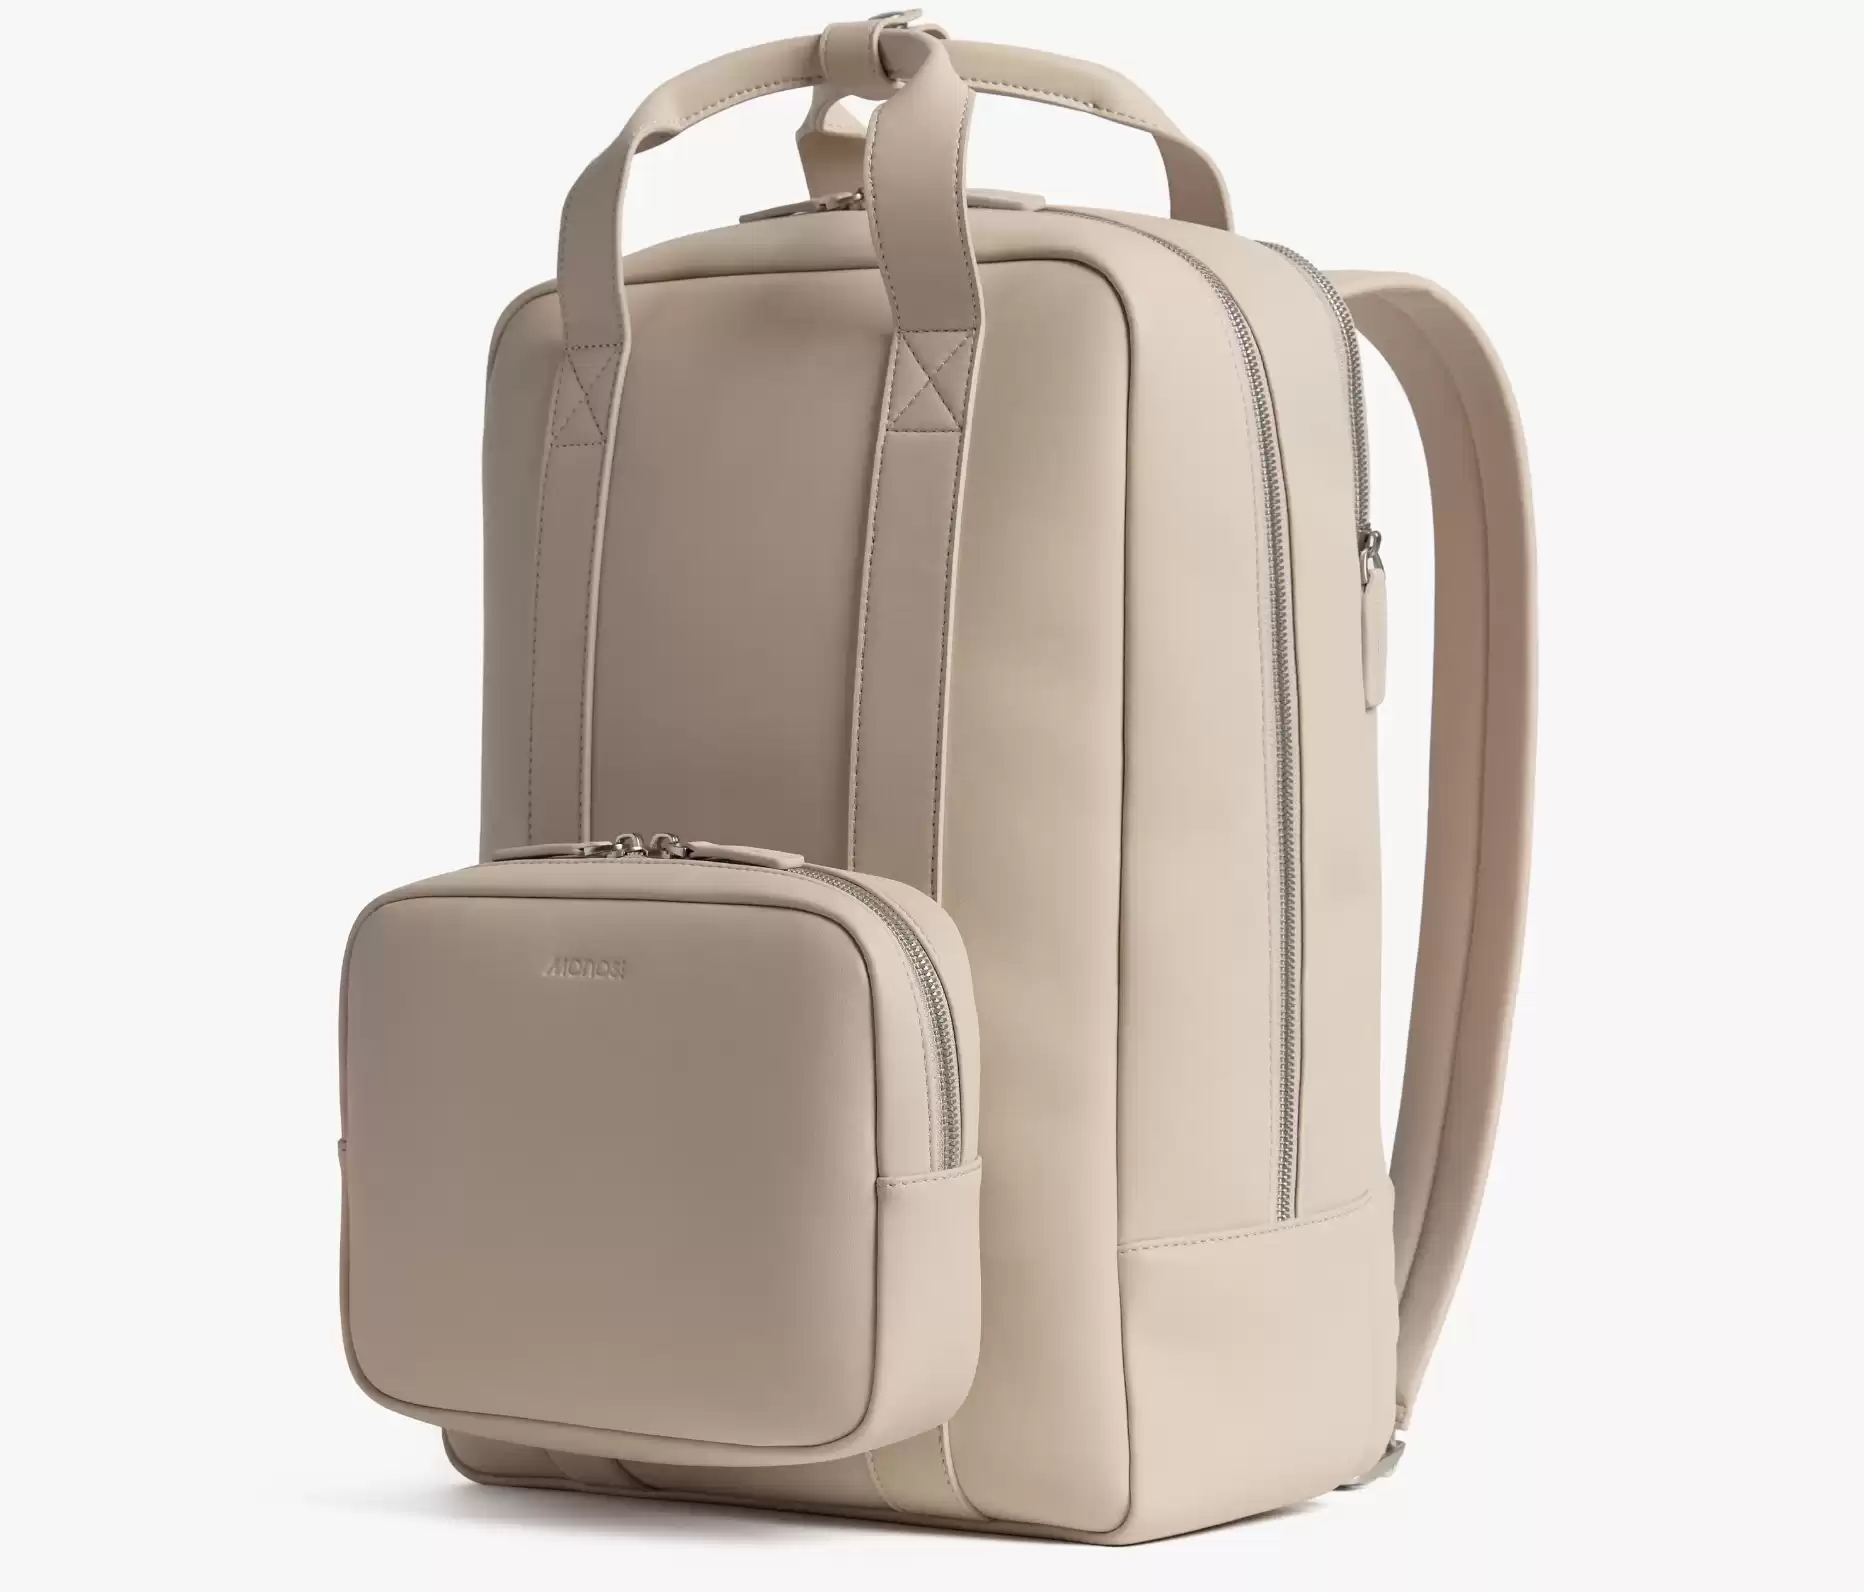 Monos Metro Backpack that adds a sleek yet practical piece to your travel outfits.